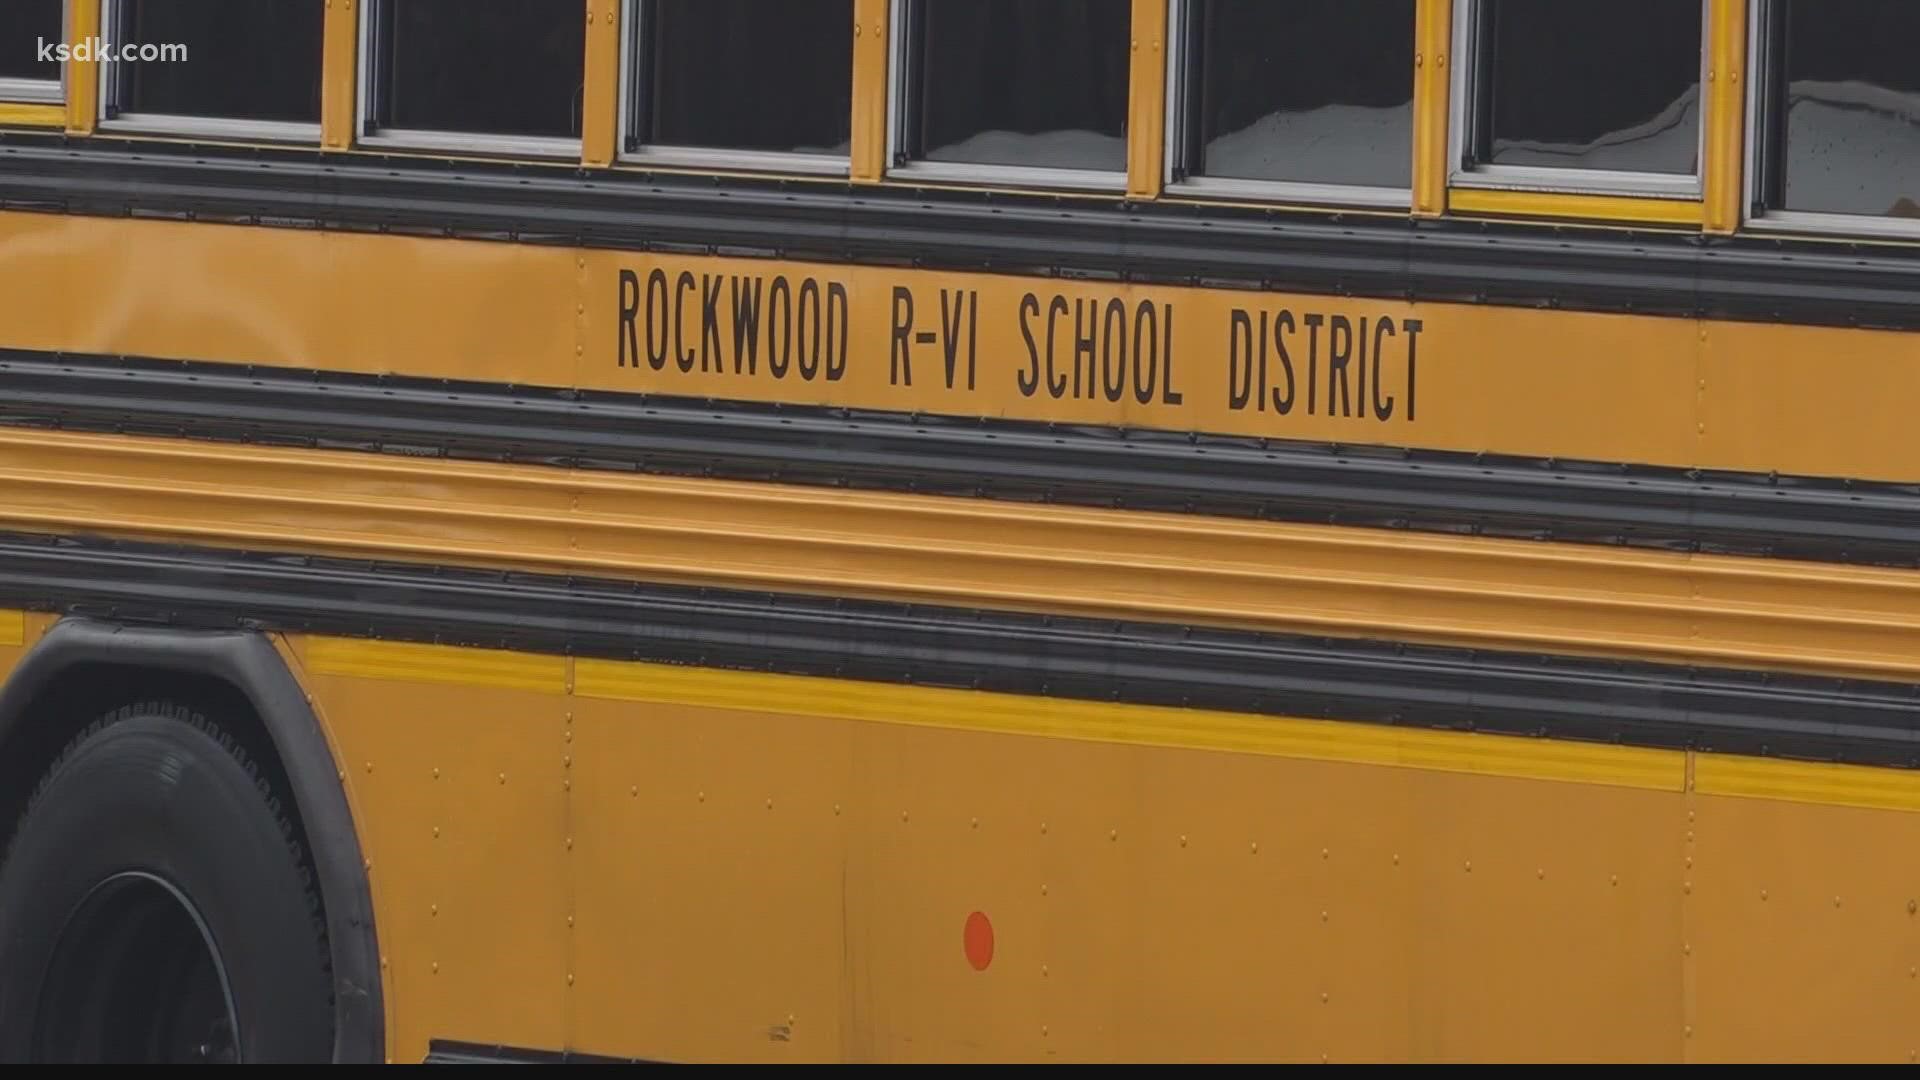 Rockwood planned to go to a mask-optional plan starting on Jan. 18, but the board voted 4-2 to move that date back.